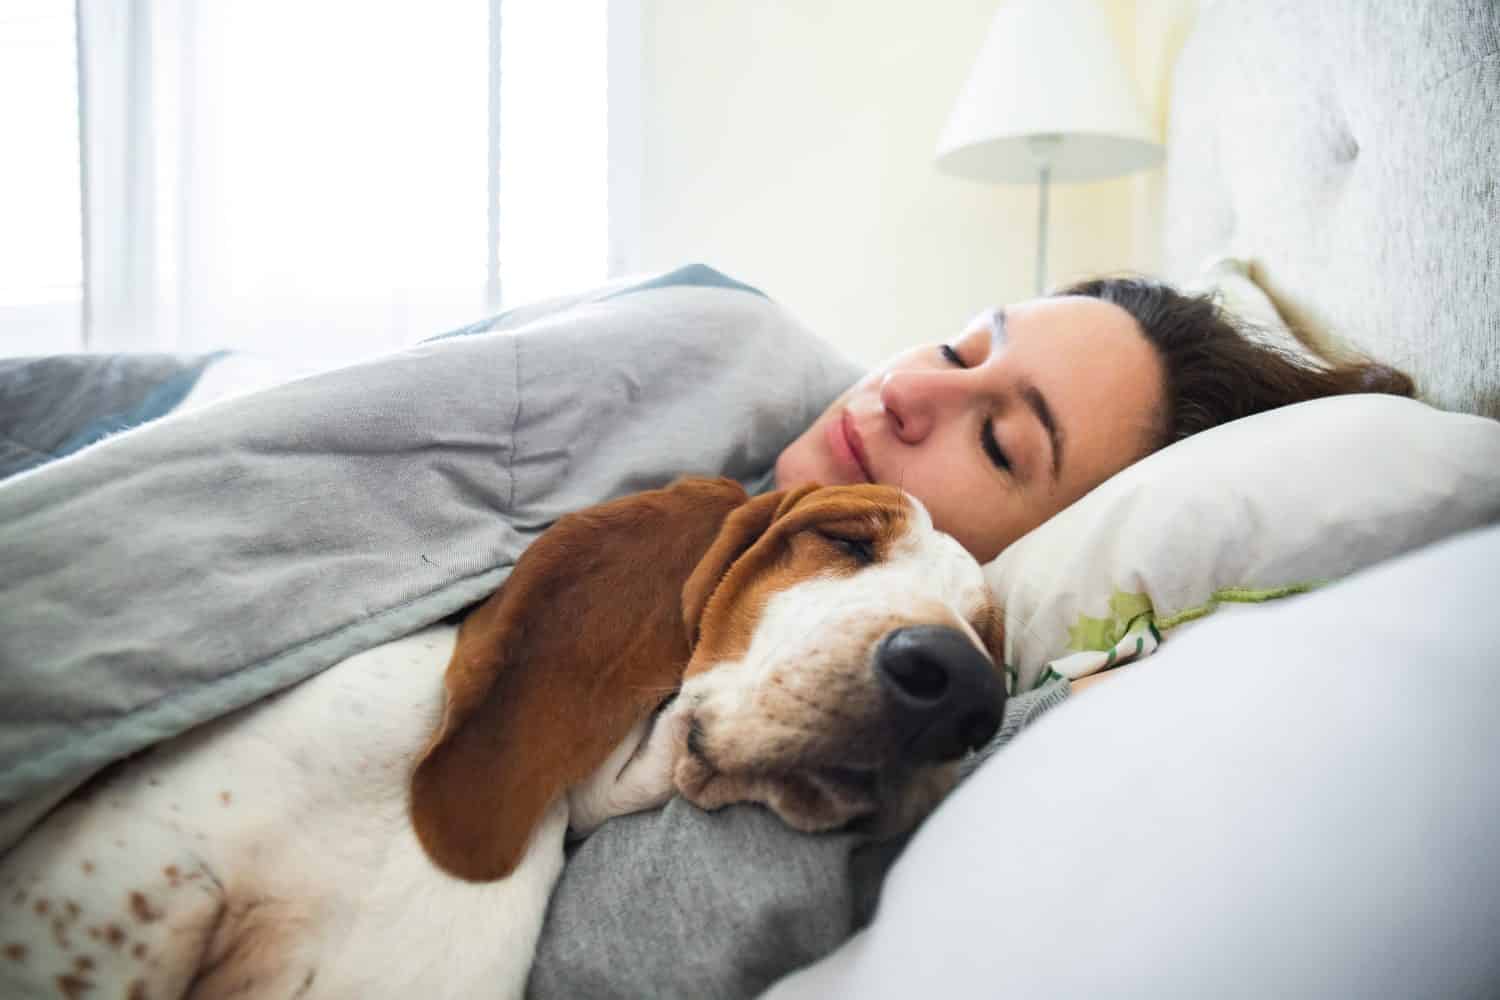 Girl and dog sleeping together comfortably and cuddled in bed in the morning. In bed with best friend brown and white basset hound dog with happy face to wake up next to your pet